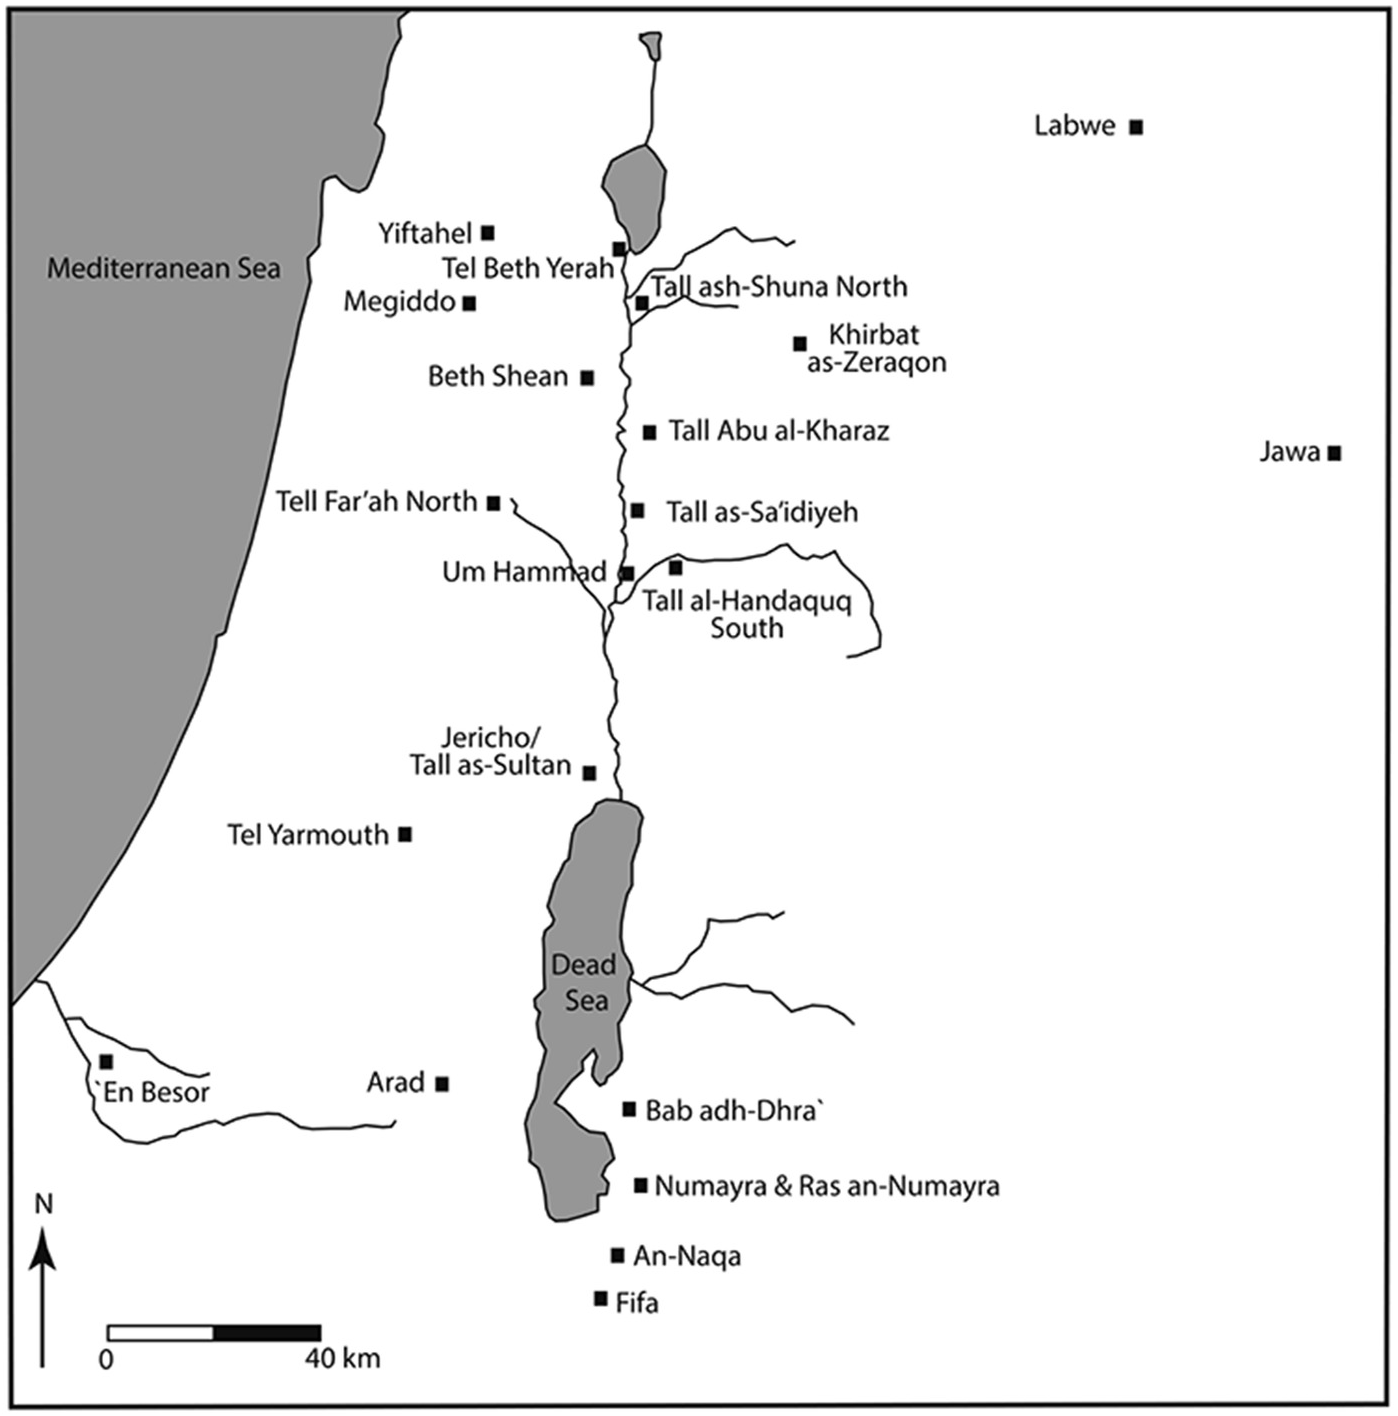 The Southern the Early Bronze Age I–III (Nine) - The Social Archaeology of the Levant